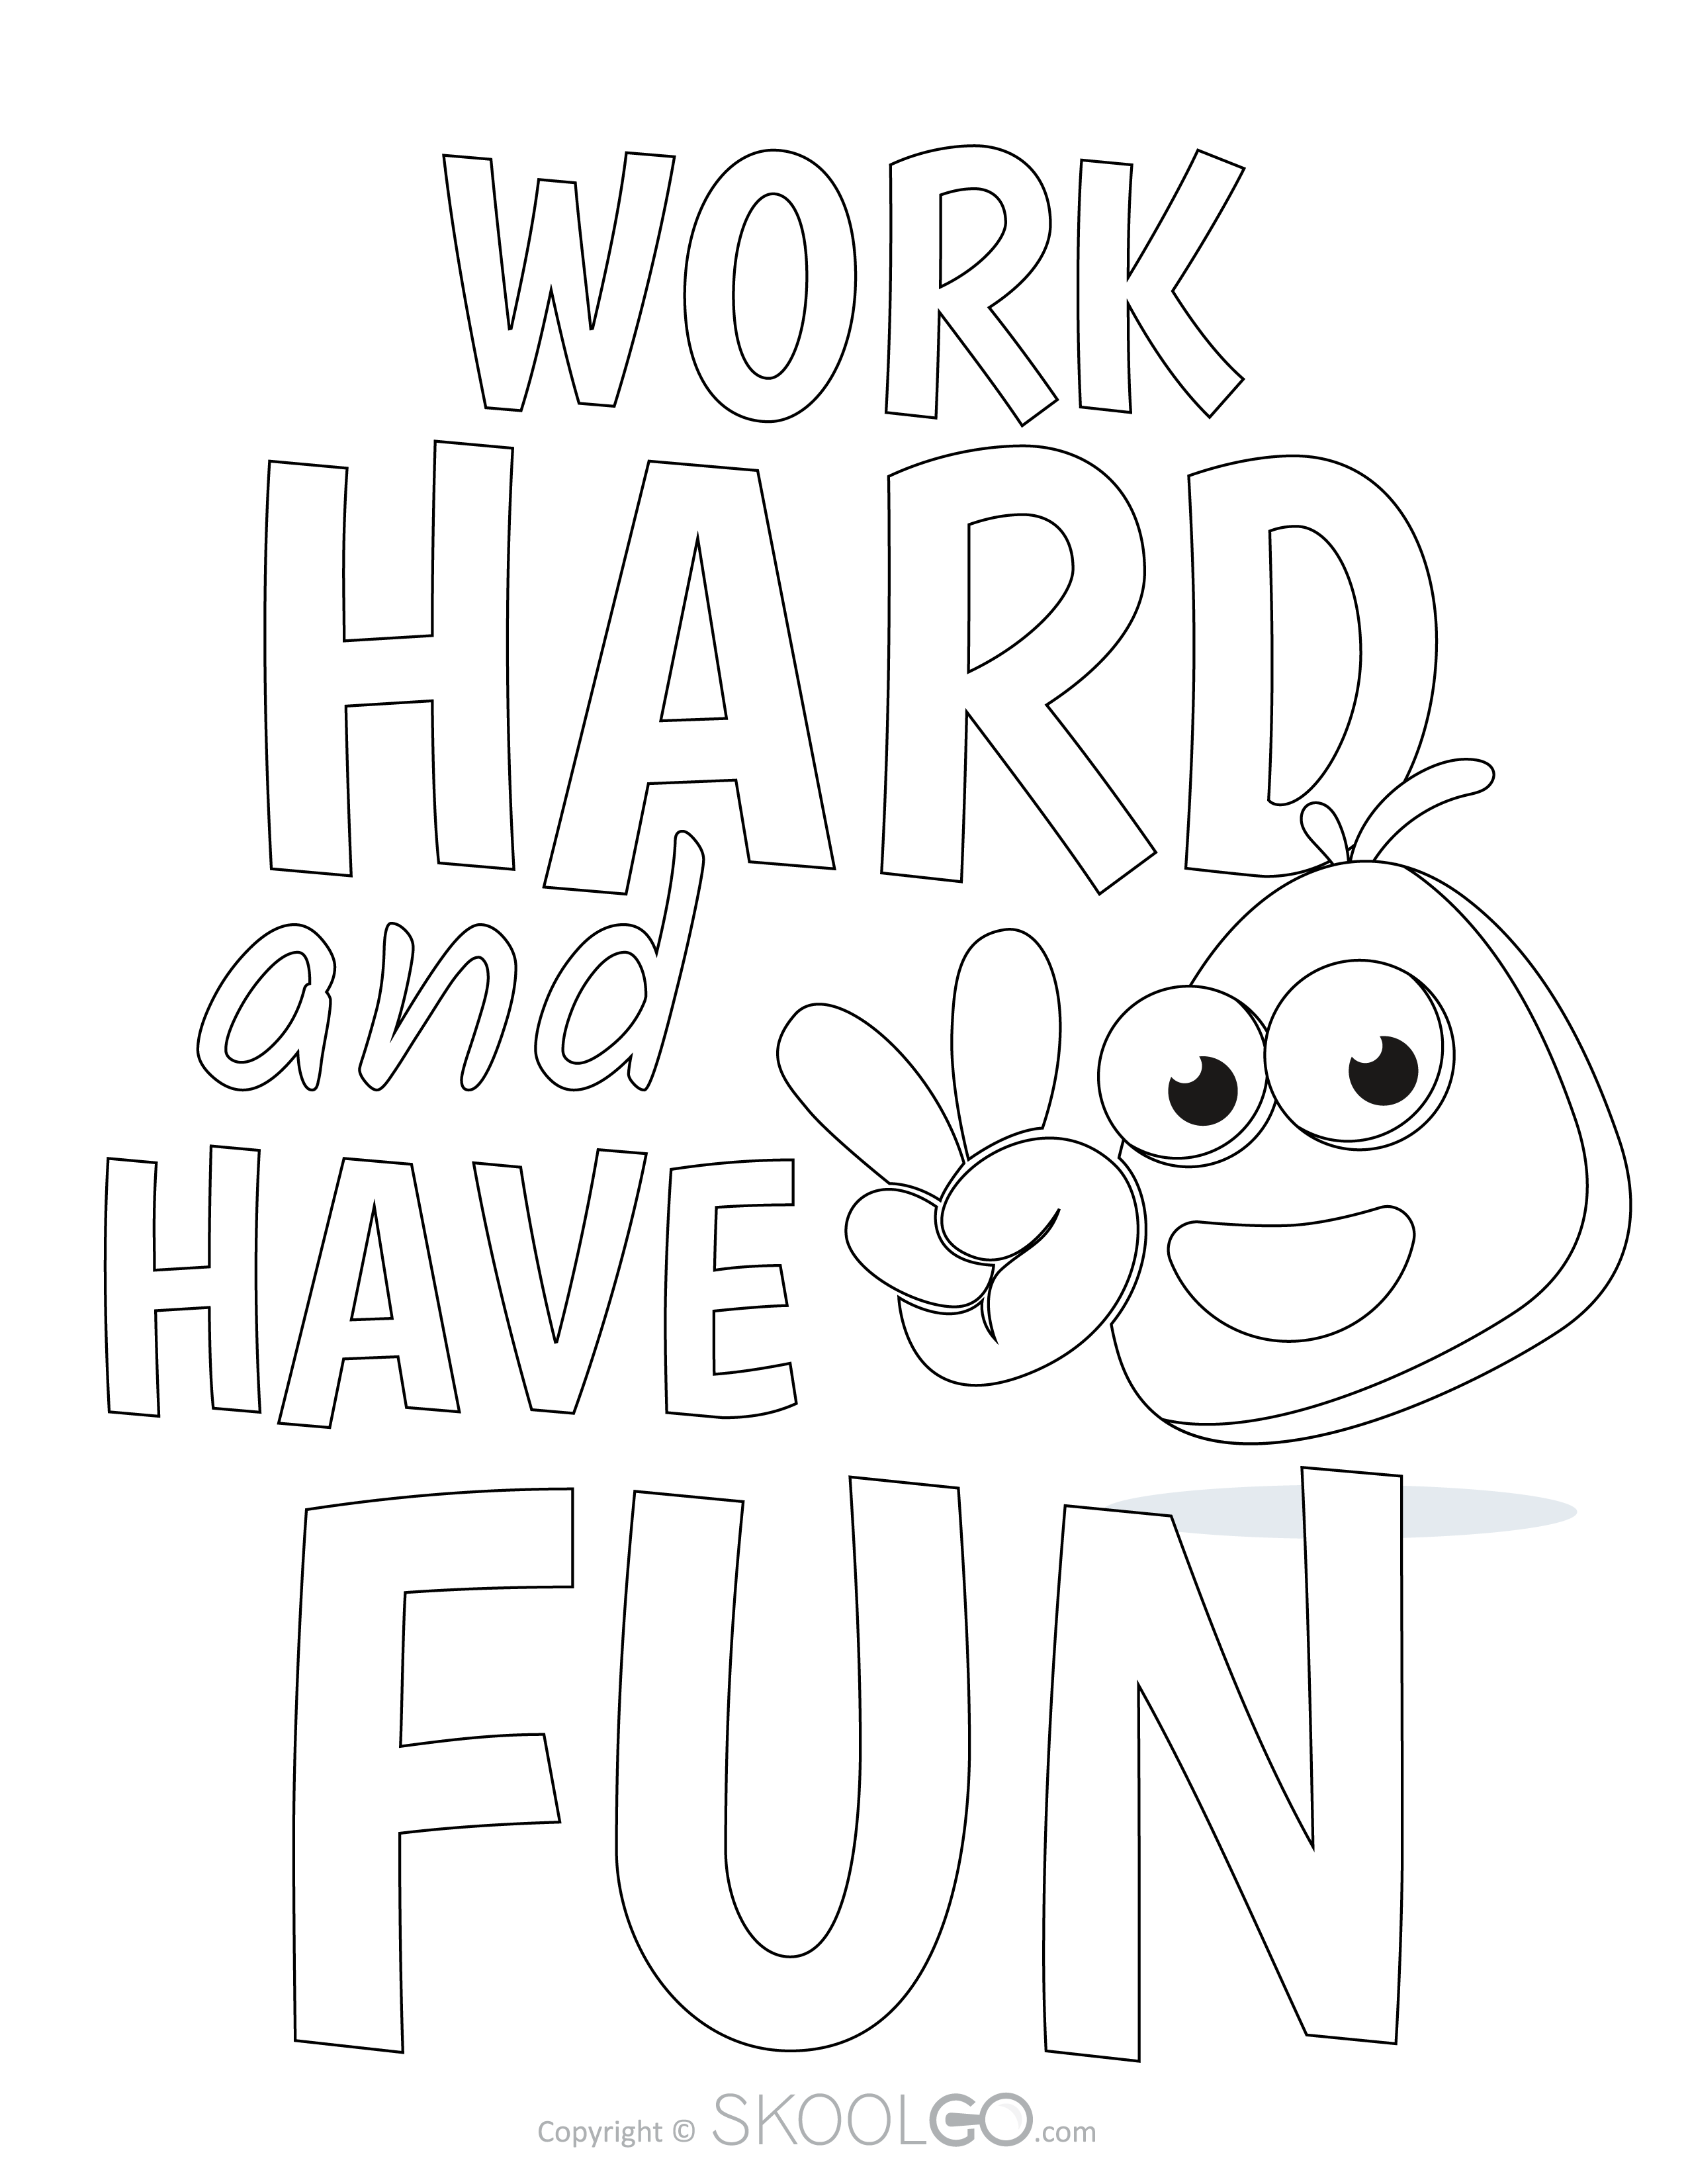 Work Hard And Have Fun - Free Classroom Poster Coloring Version